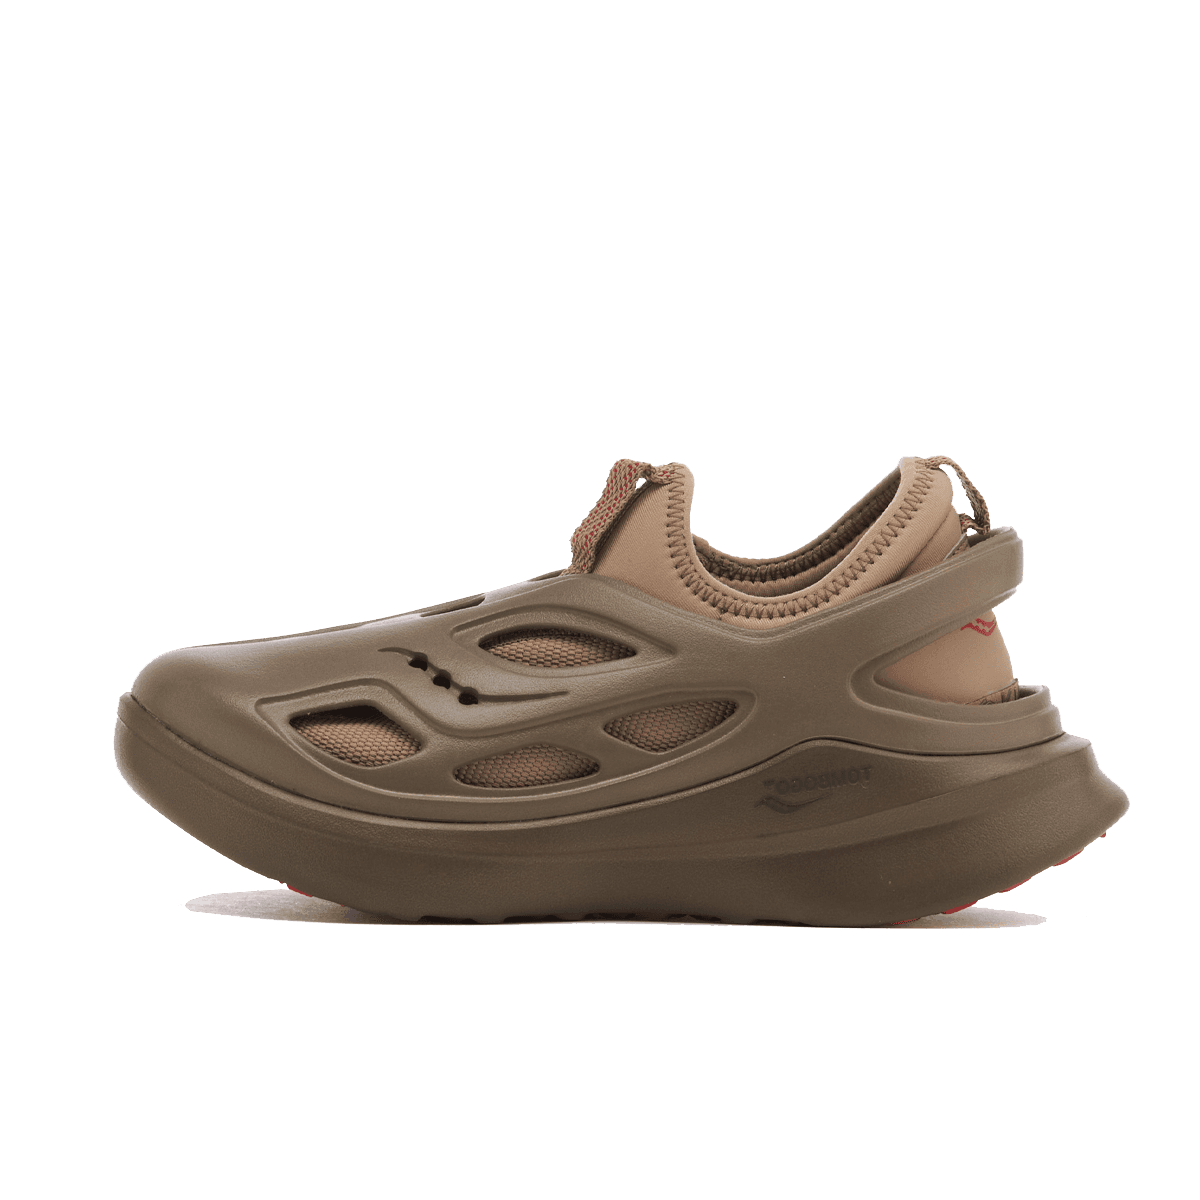 TOMBOGO x Saucony Butterfly 'Boulder Brown' | S70828-2 | The Drop Date